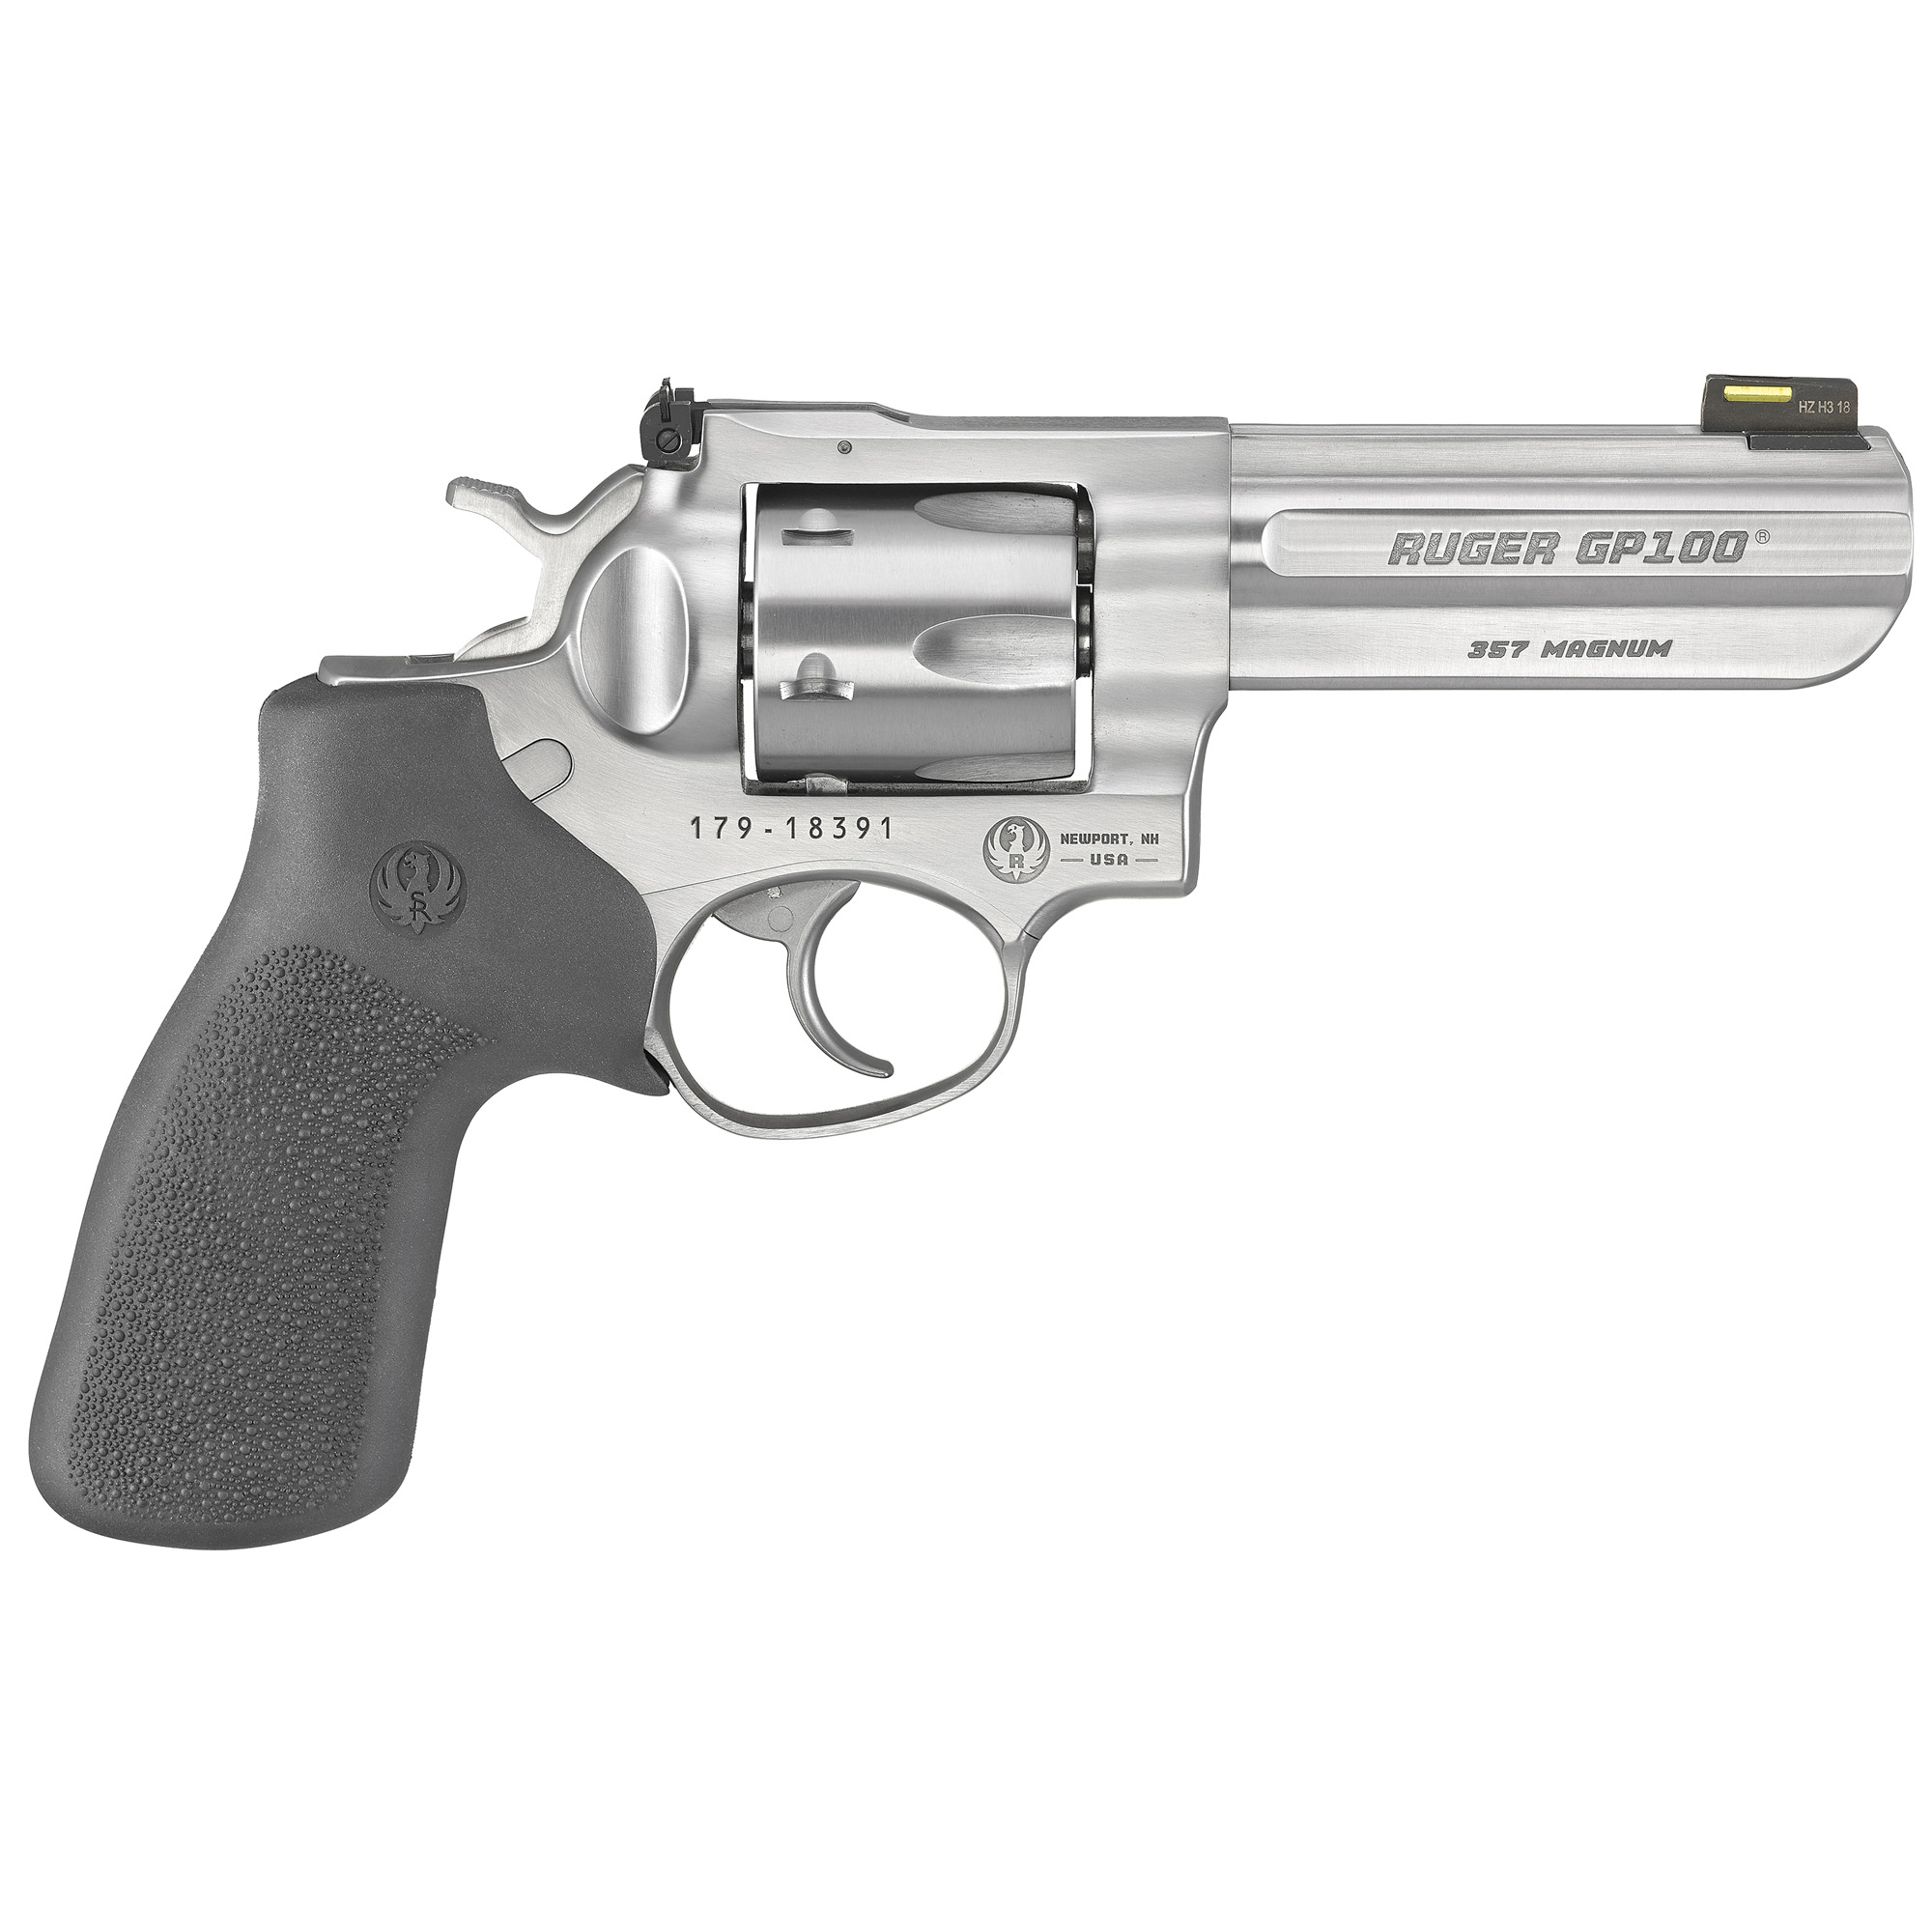 RUGER GP100 357MAG 4.2 STS 6RD MC